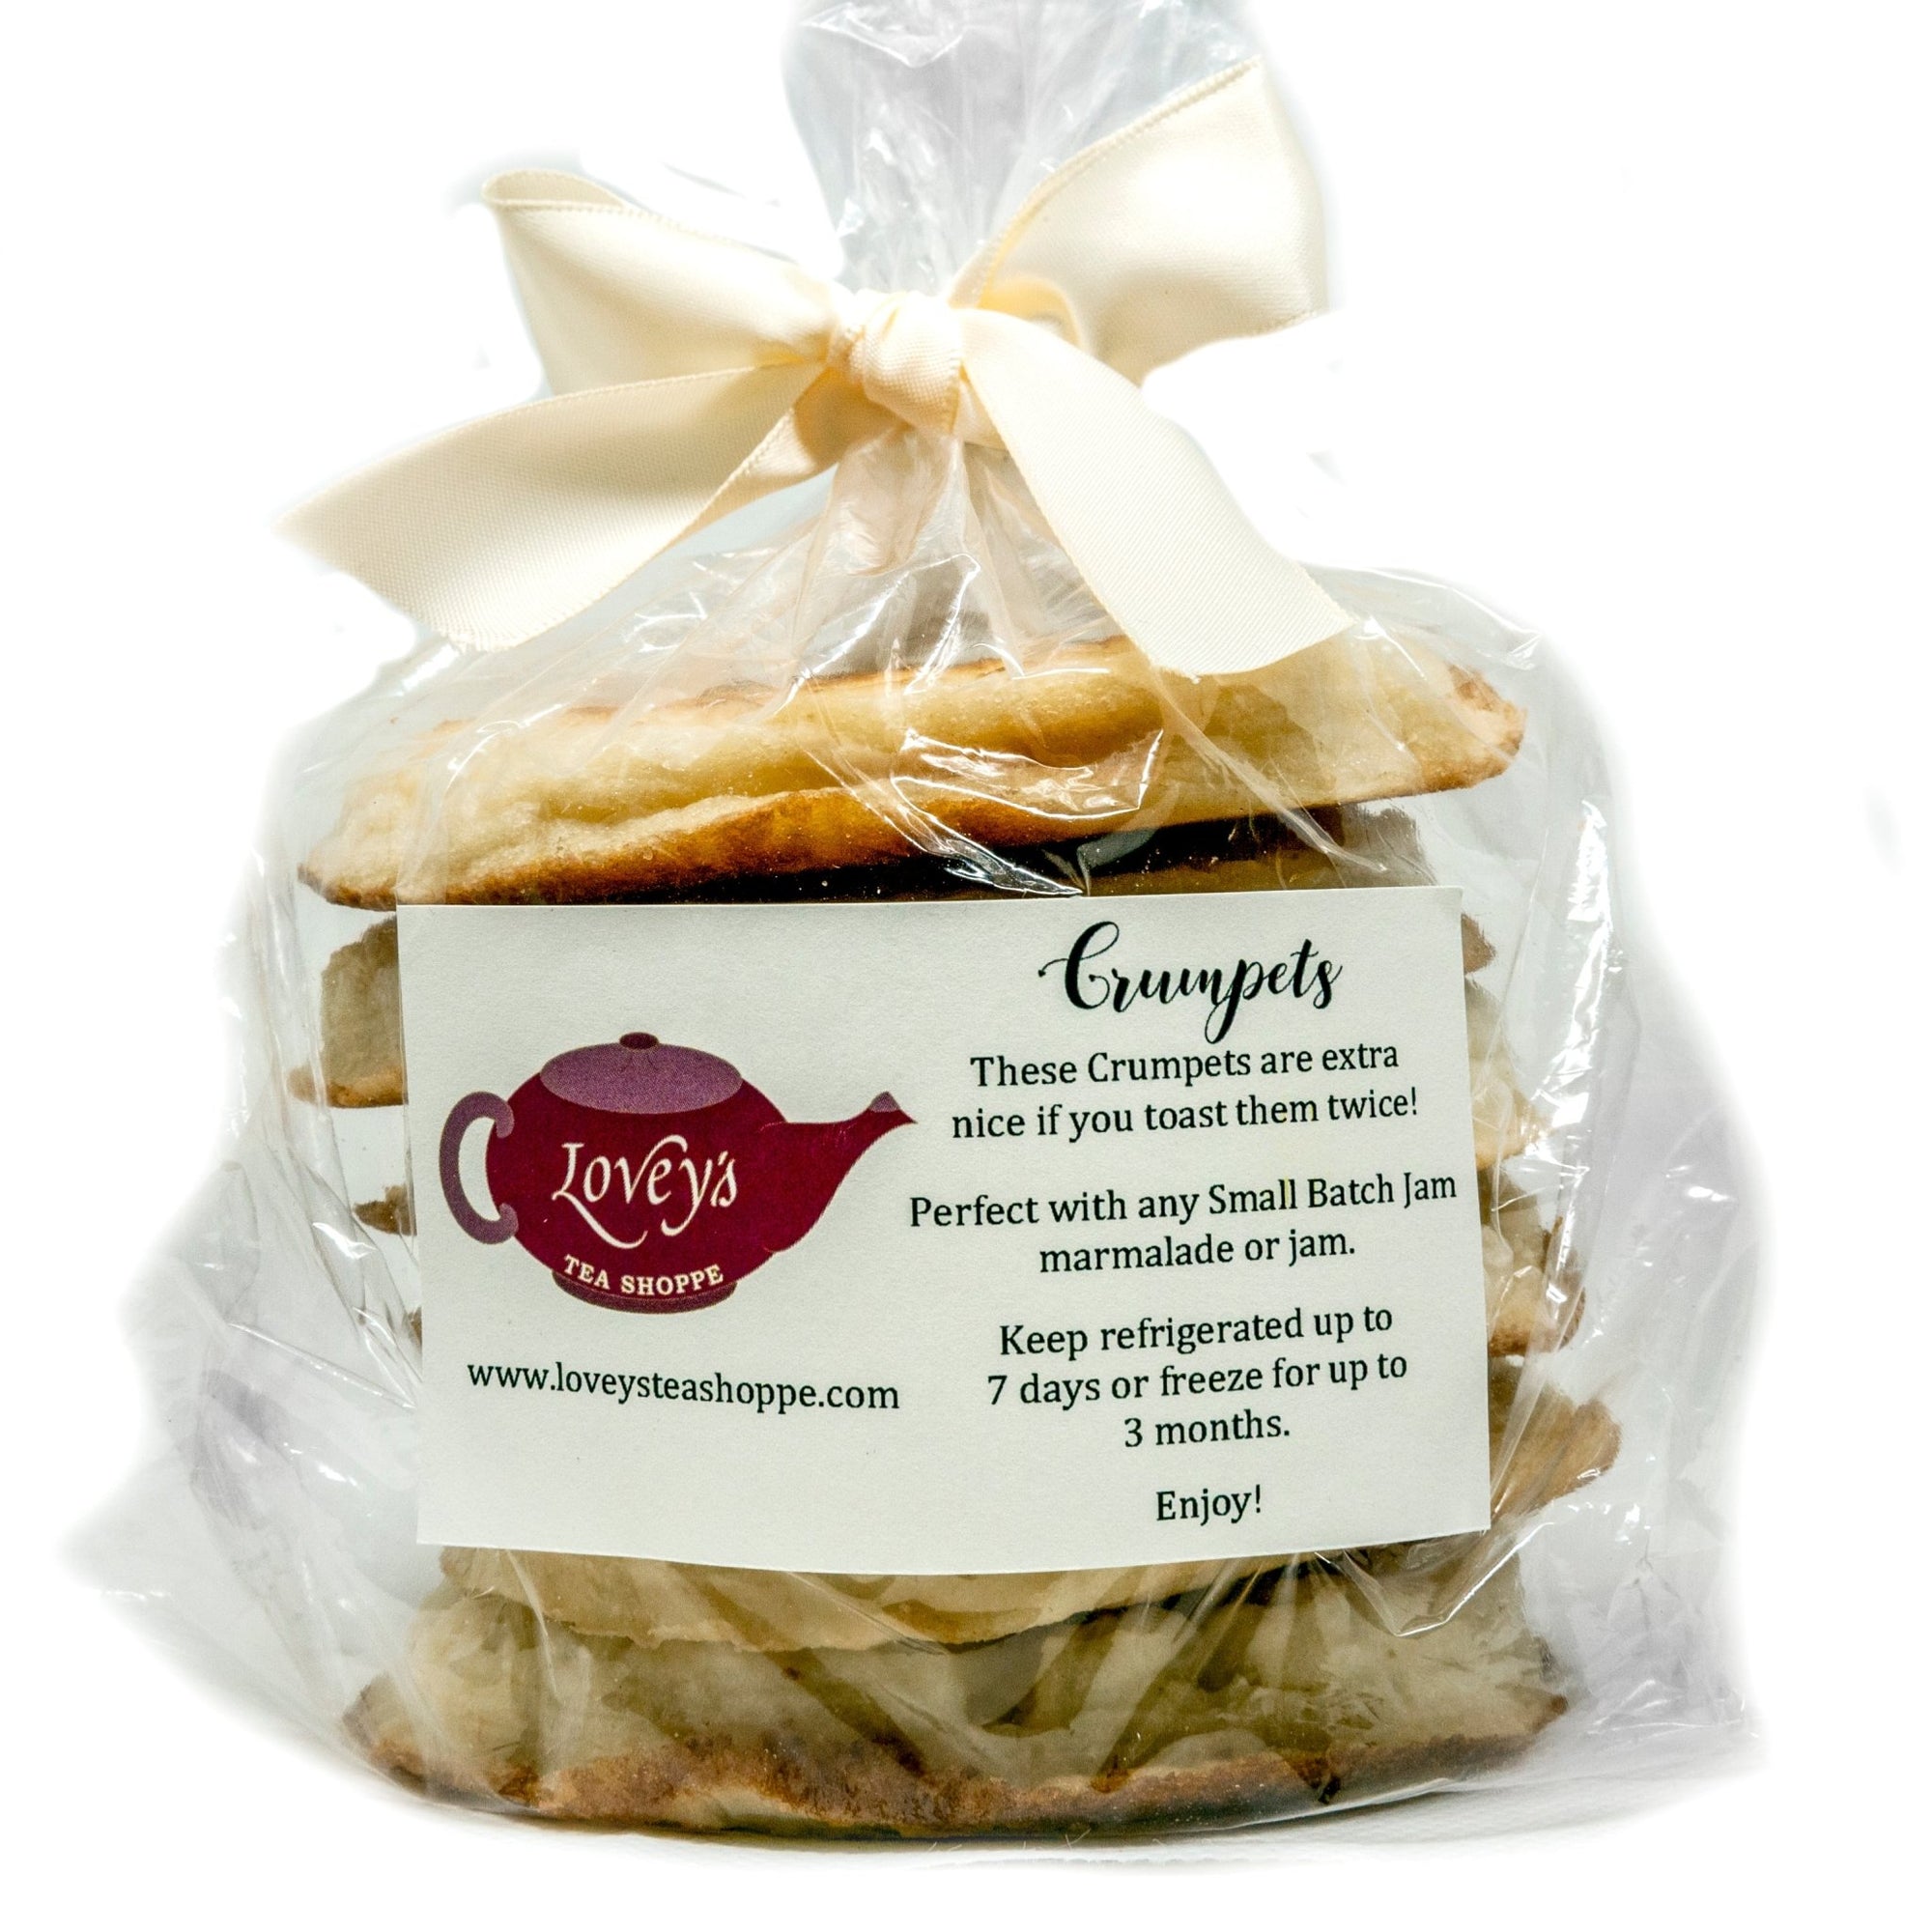 Lovey's Tea Shoppe Crumpets - 6 Pack - Small Batch Jam Co